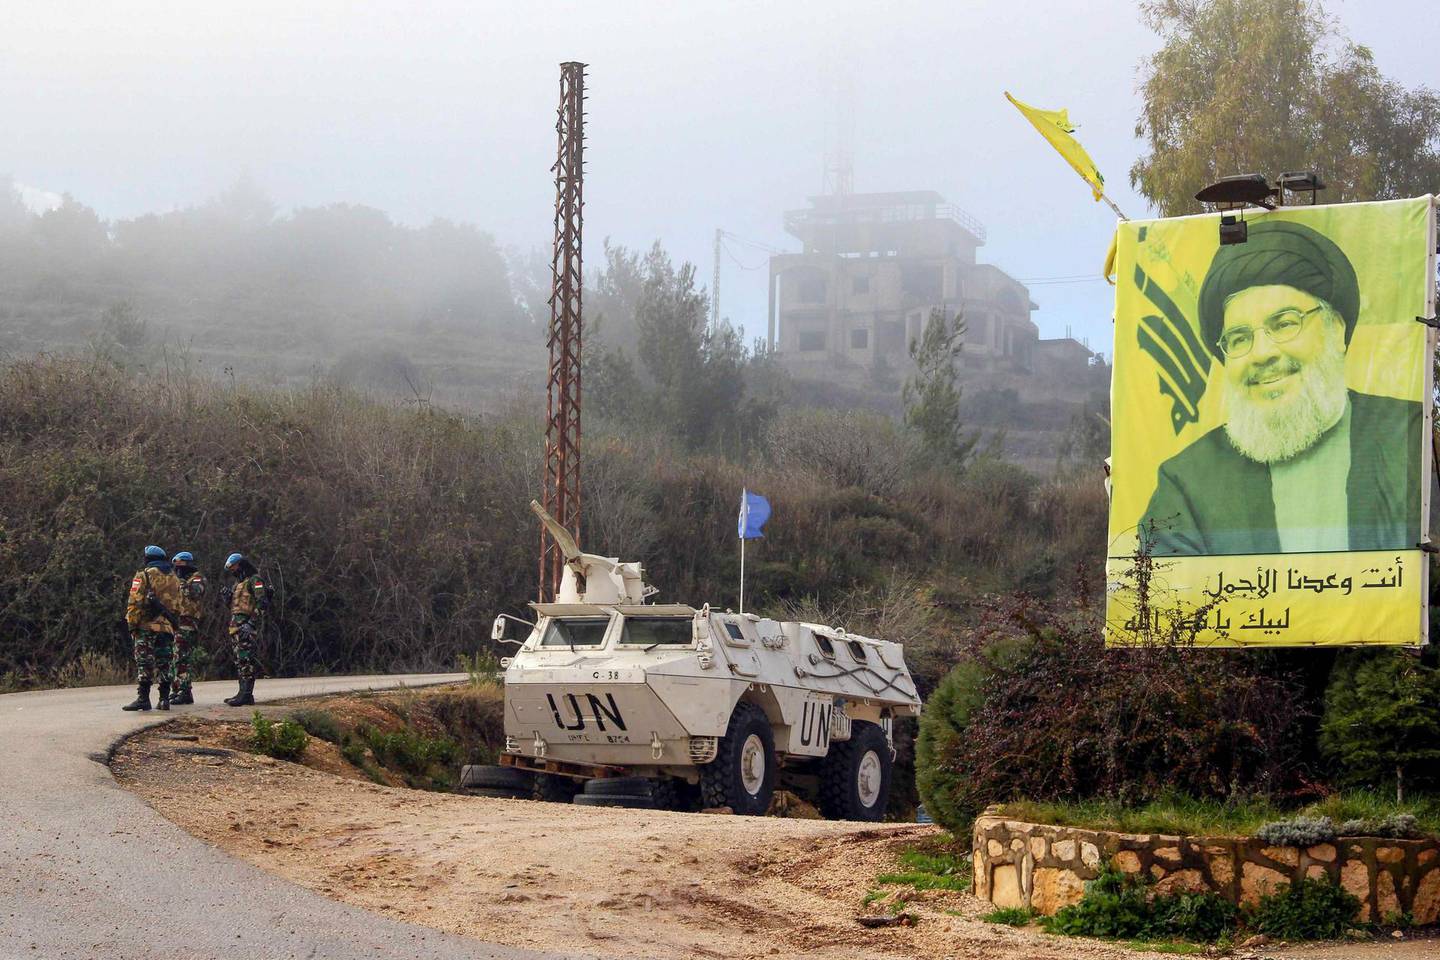 A United Nations Interim Forces in Lebanon (UNIFIL) armoured vehicle is parked under a portrait of Hezbollah leader Hassan Nasrallah on a side road in the southern Lebanese town of Kfar Kila near the border with Israel on January 3, 2020. Following this morning's killing of Iranian commander, Major General Qasem Soleimani, Lebanon's Iran-backed Hezbollah movement called for the missile strike by Israel's closest ally, to be avenged. "Meting out the appropriate punishment to these criminal assassins... will be the responsibility and task of all resistance fighters worldwide," Hezbollah chief Hassan Nasrallah said in a statement.
 / AFP / Ali DIA
